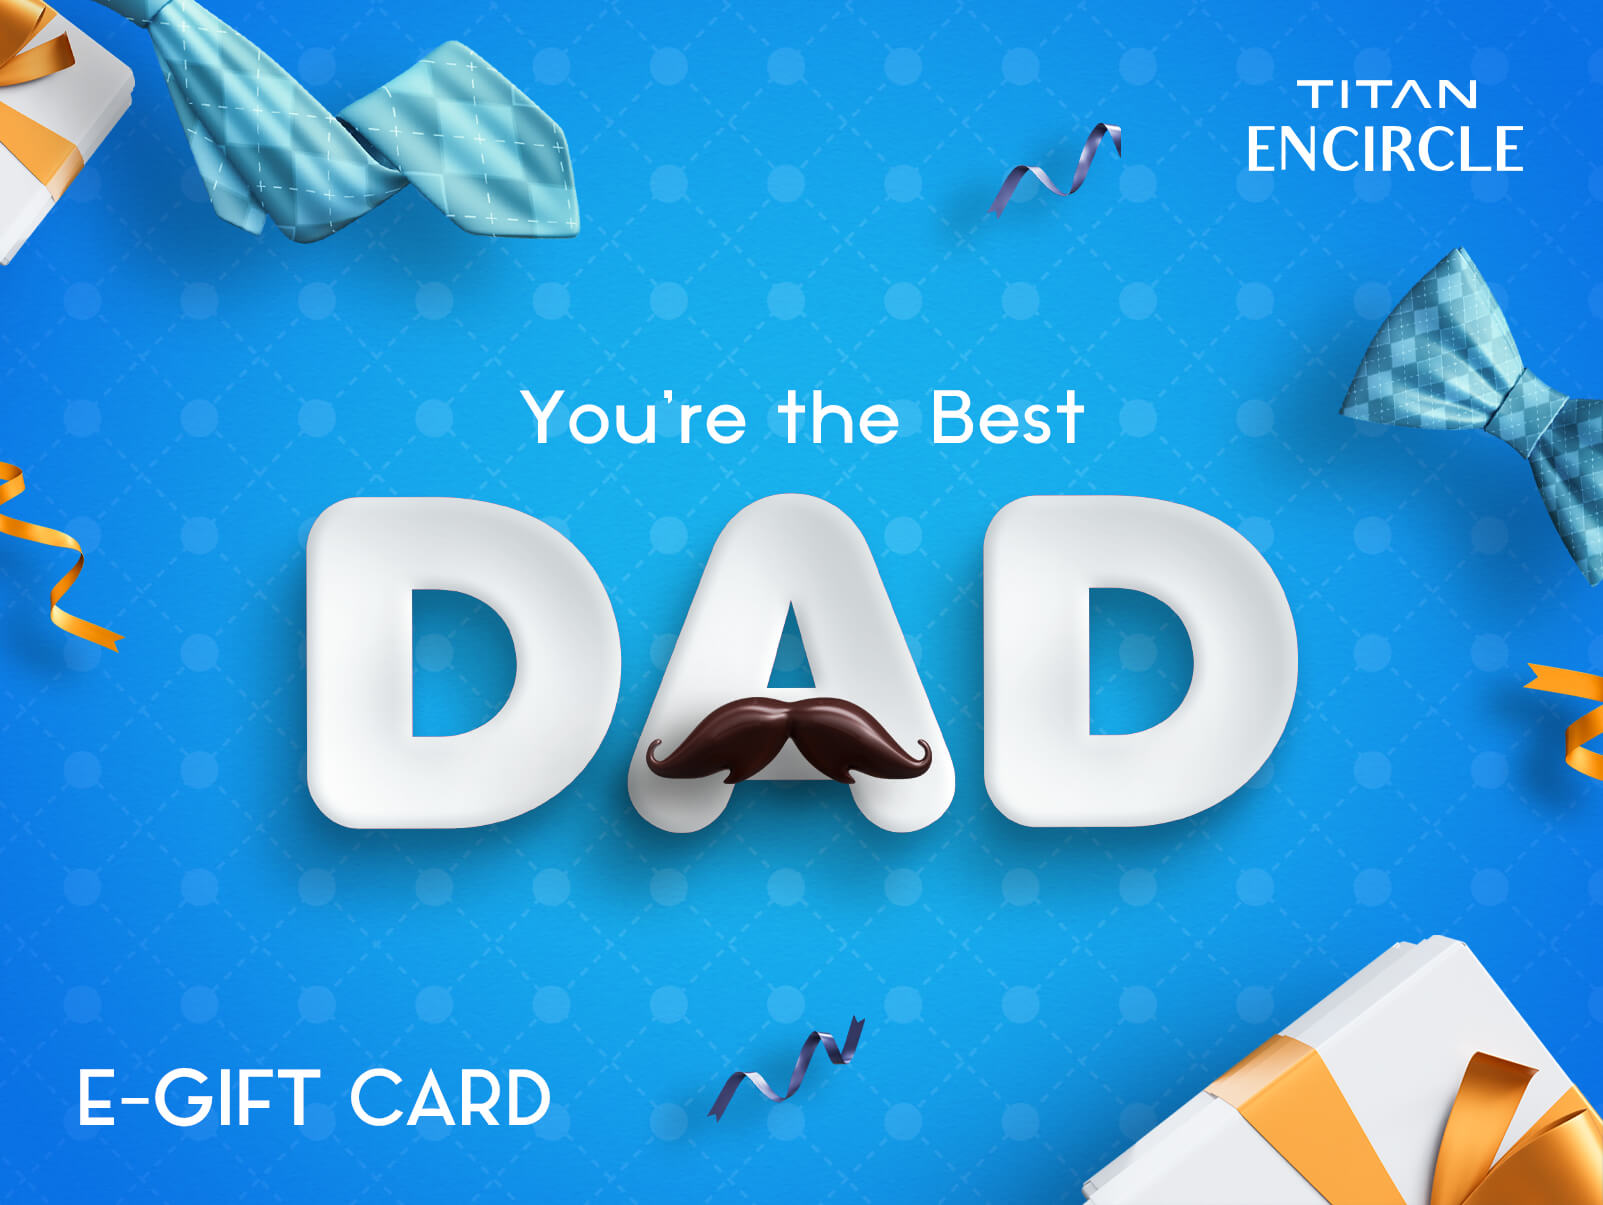 Buy Gift Card on Father's Day